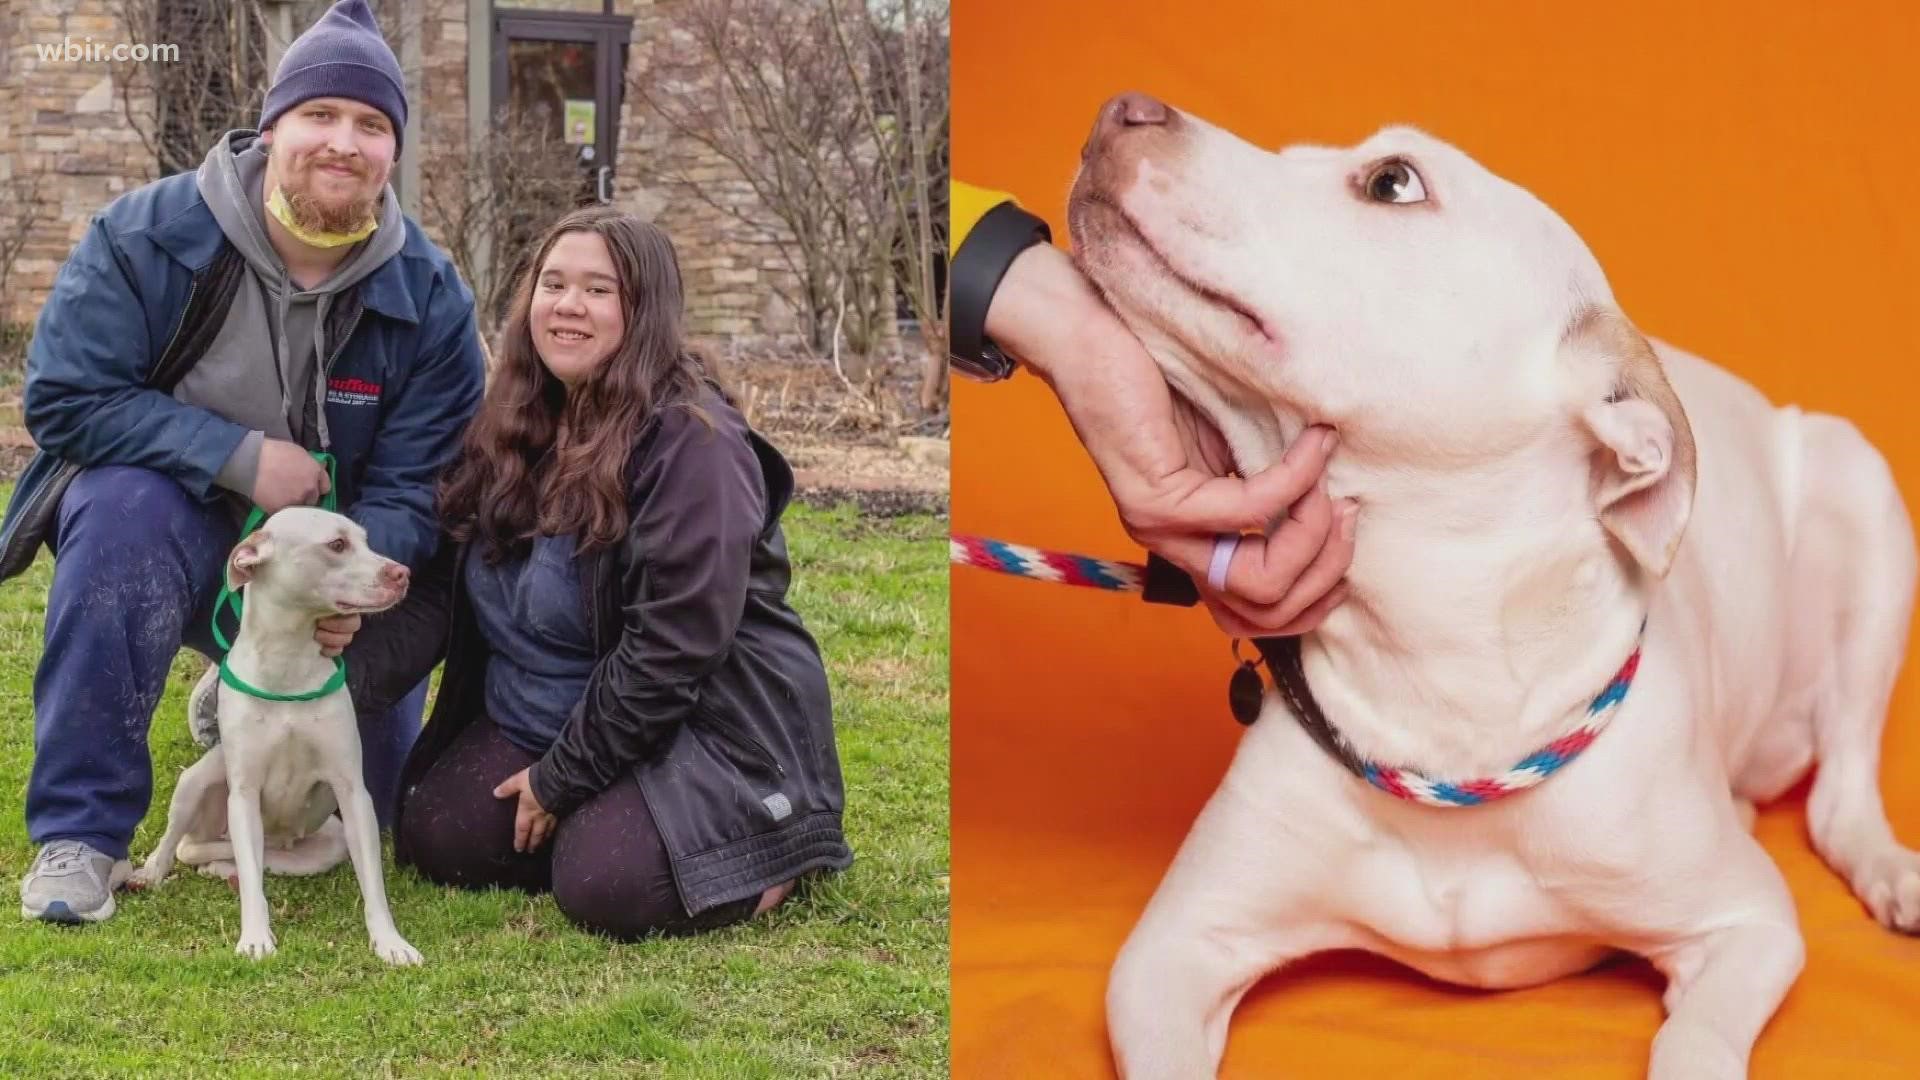 Young Williams Animal Center posted about a dog in need of adoption. It wasn't long before the dog's rightful owners claimed her after she was missing almost a year.